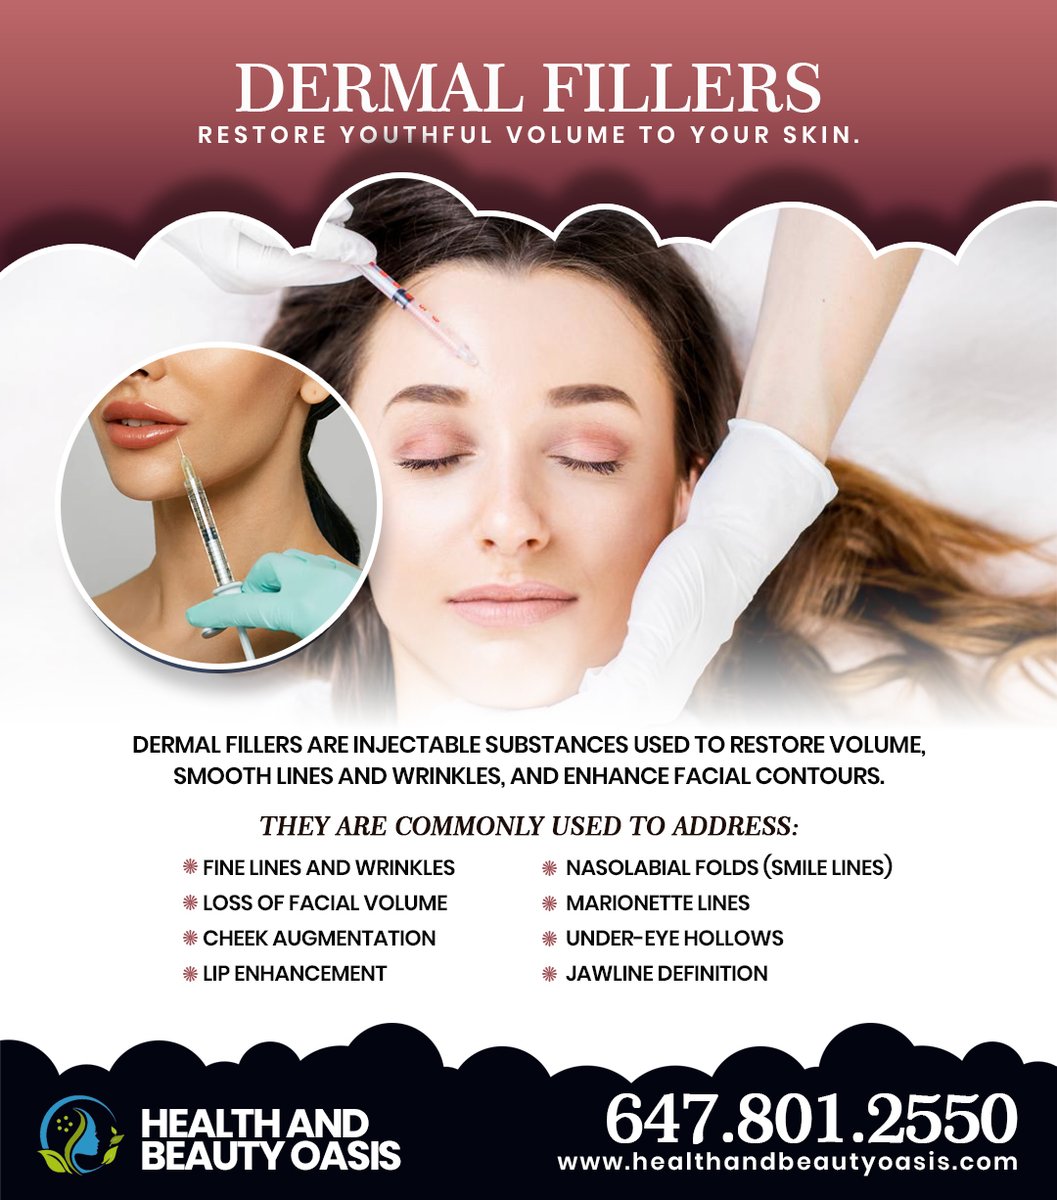 Dermal Fillers Restore Youthful Volume to Your Skin !!
Call or text: ☎️(647) 801-2550
Website: healthandbeautyoasis.com
#healthandbeauty #healthandbeautyoasis #mississauga #ontario #beautysalon #beautyparlour #canada #milton #oakville #oakvilleontario #Oasis #dermalfillers